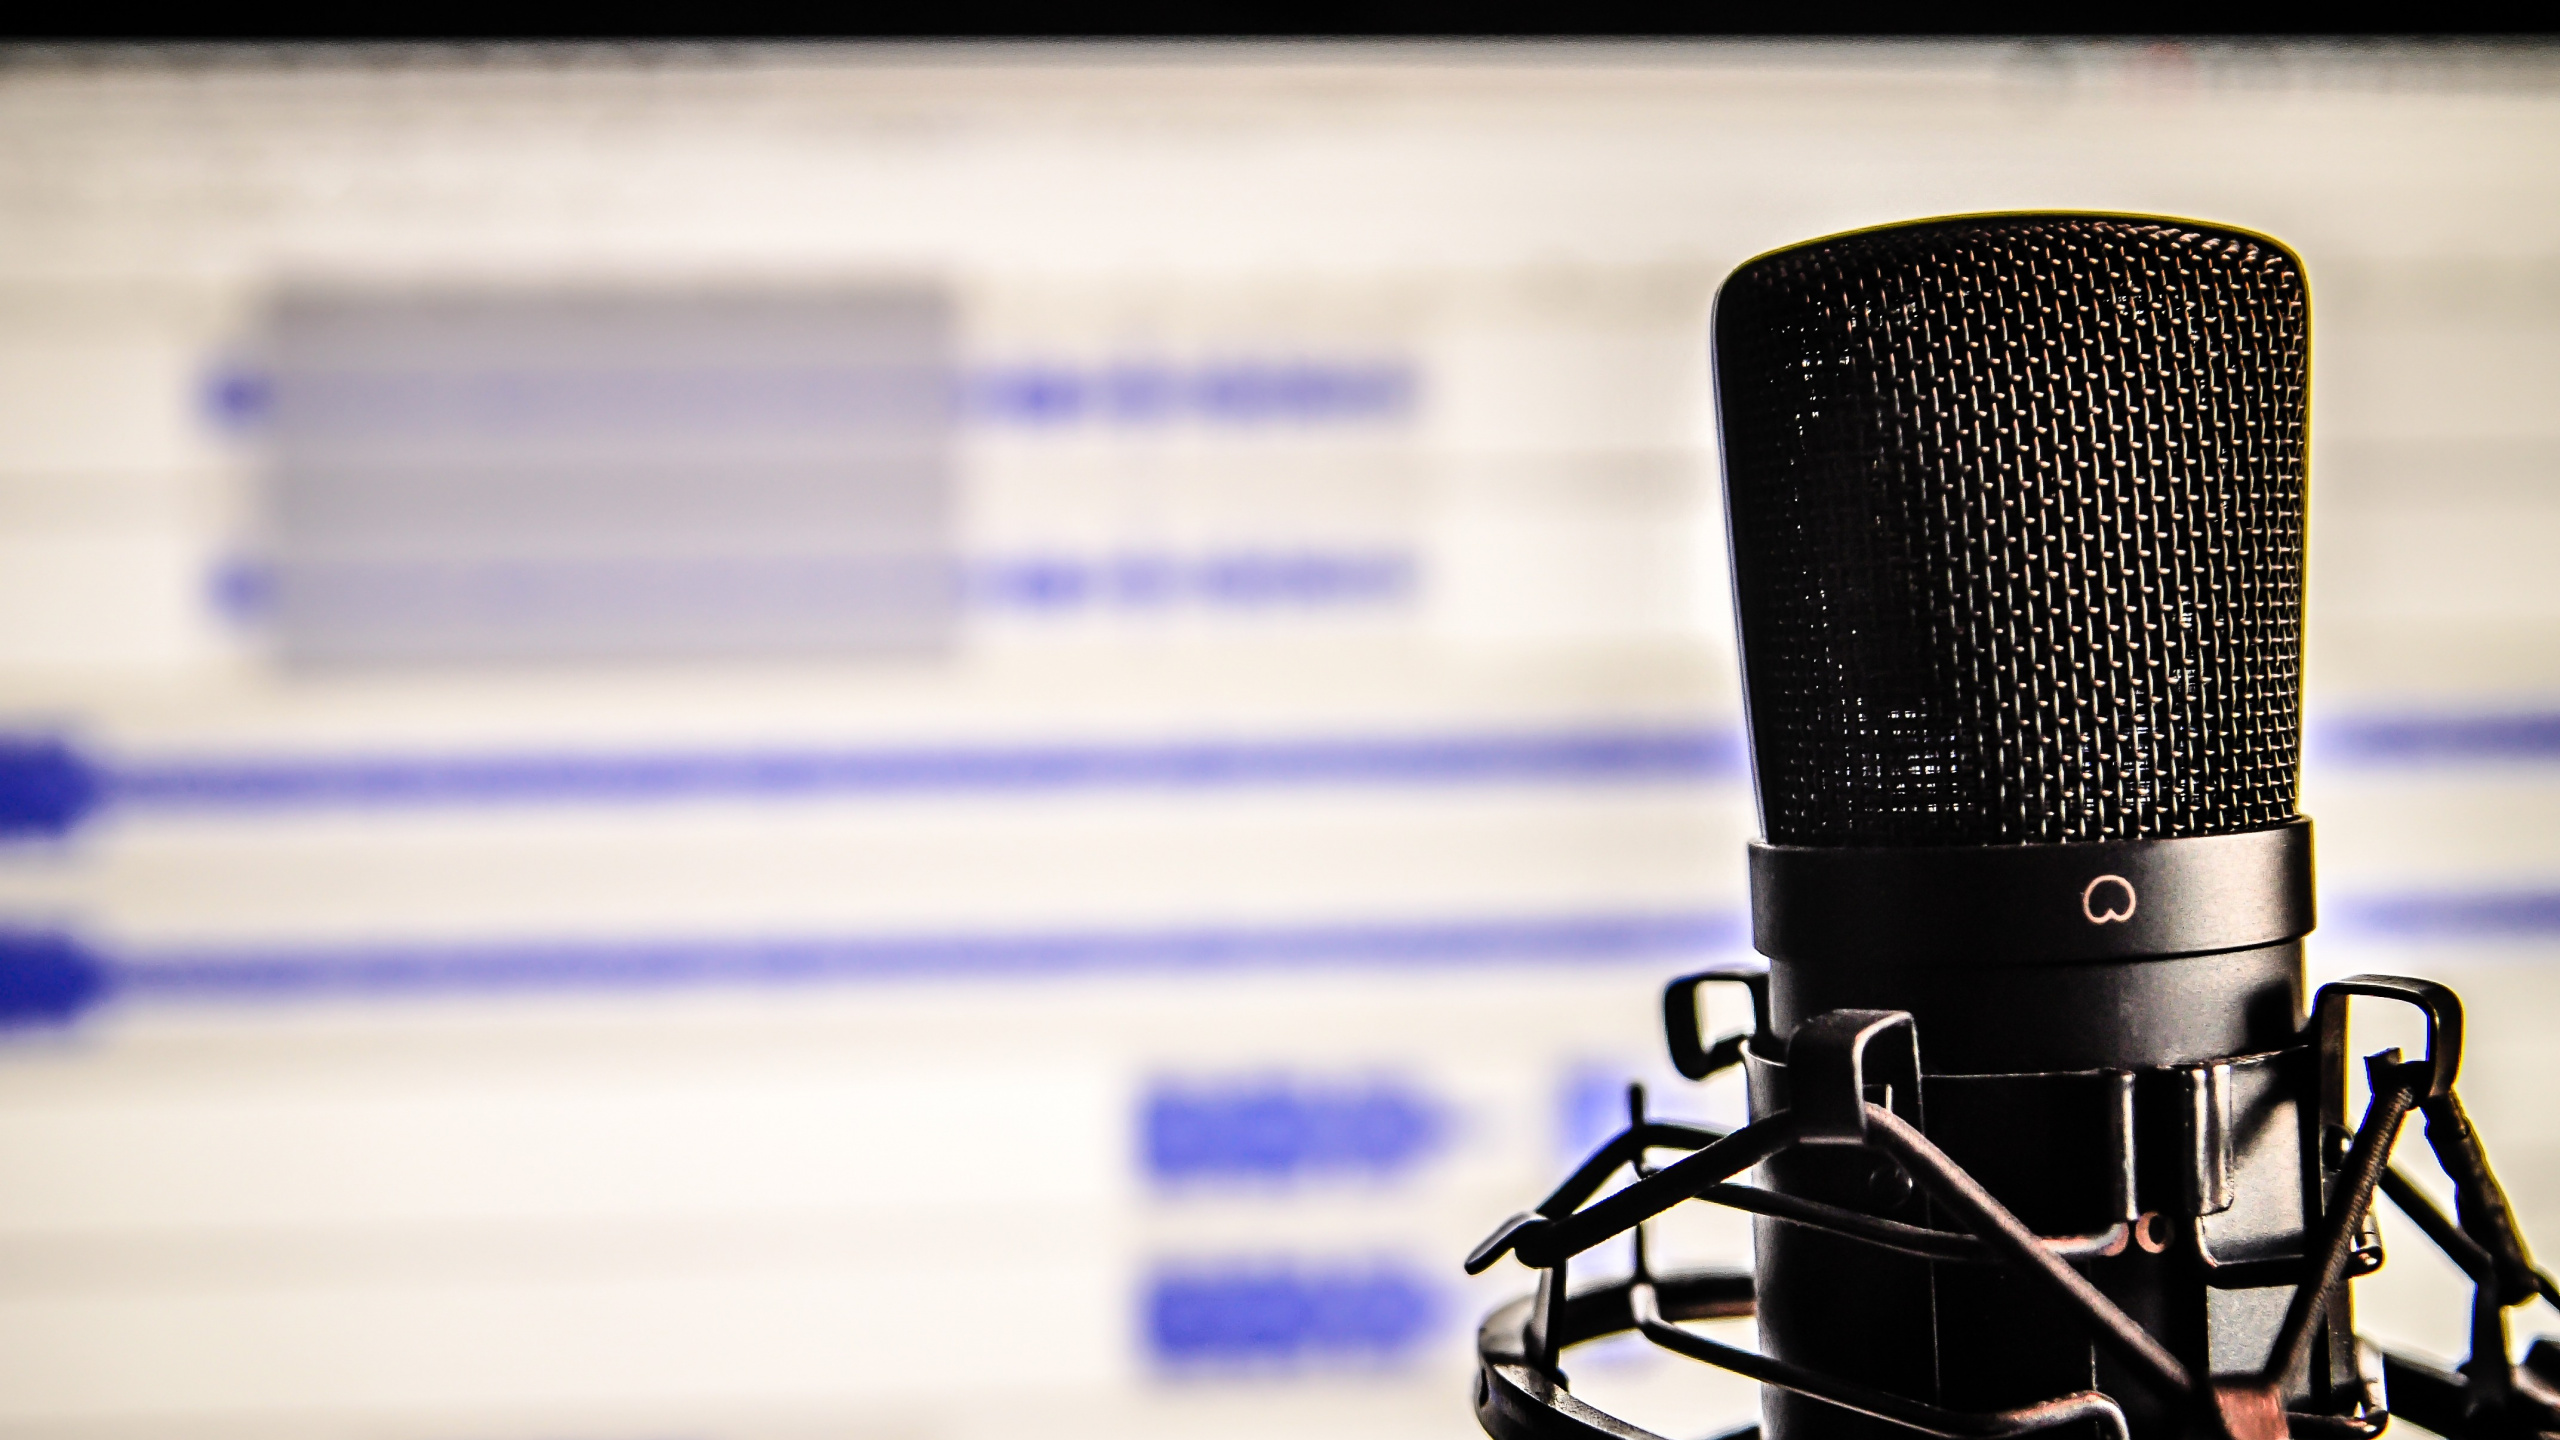 Microphone, Audio Equipment, Recording Studio, Electronic Device, Technology. Wallpaper in 2560x1440 Resolution